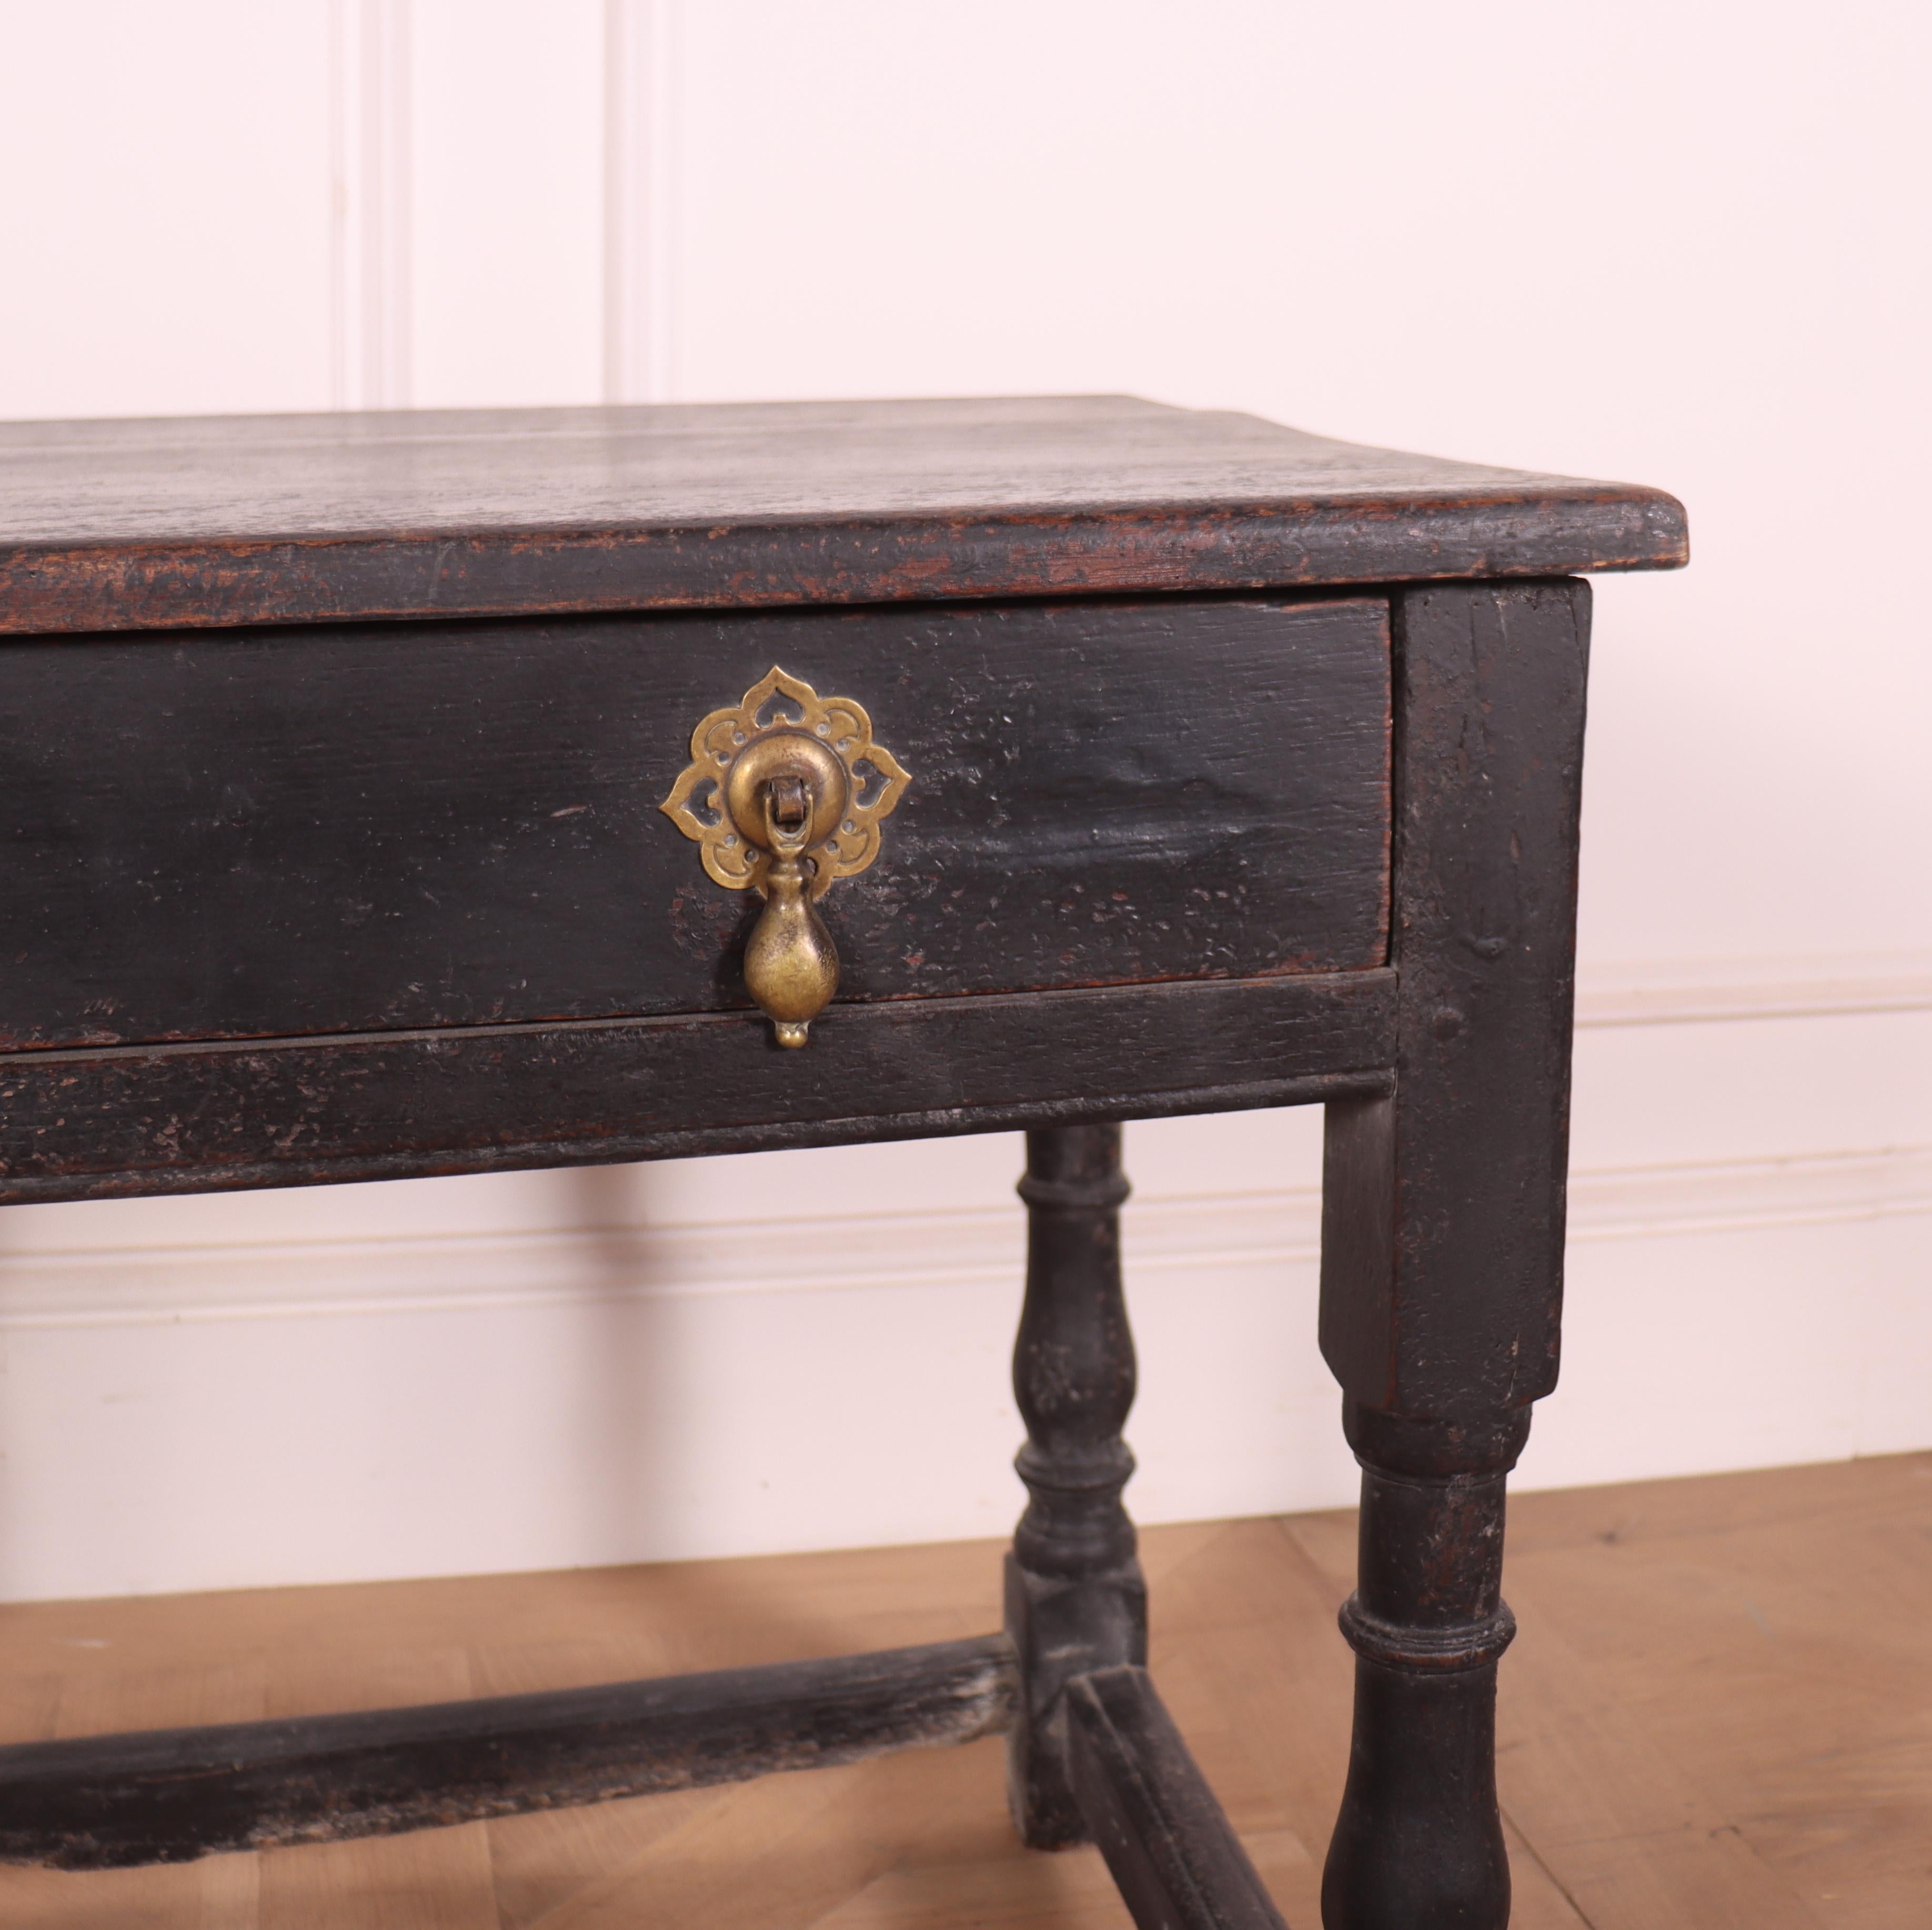 18th century English painted oak one drawer lamp table. 1780.

Reference: 7810

Dimensions
28 inches (71 cms) wide
20 inches (51 cms) deep
23 inches (58 cms) high.